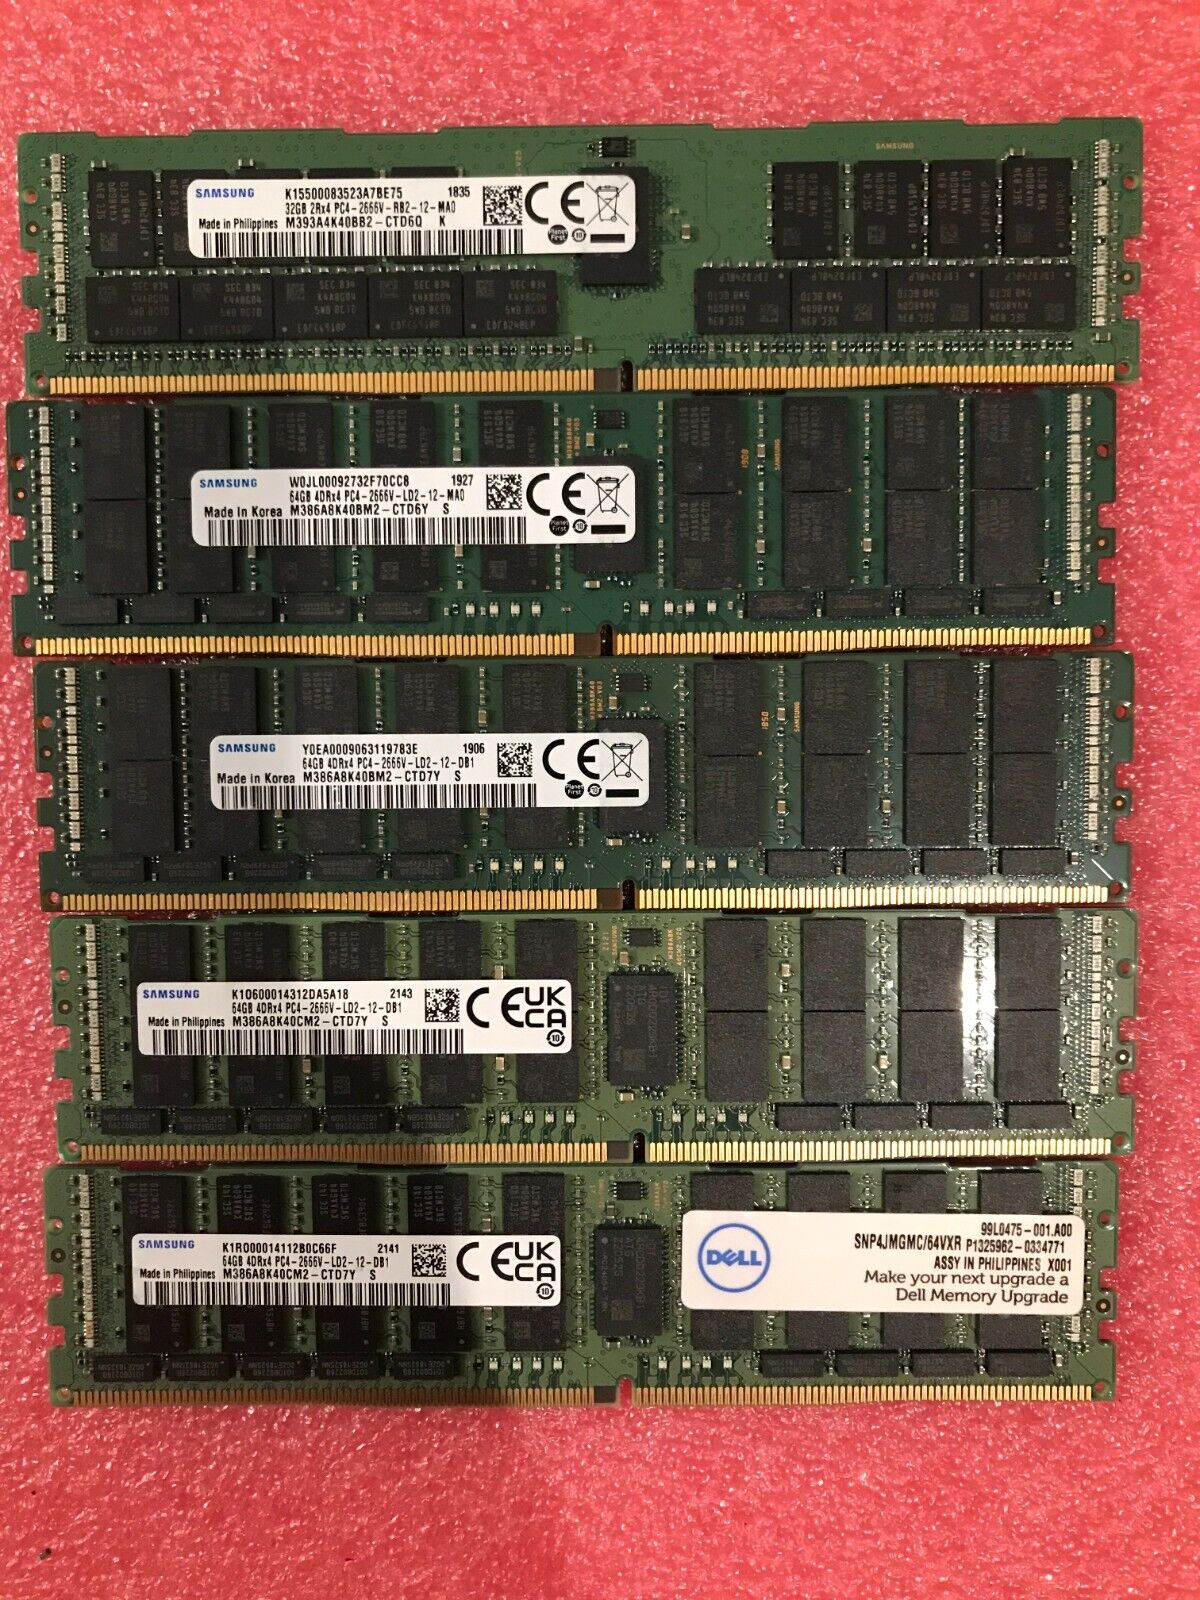 Lot Of 15 PCS Server Memory,Test Failed,Sold As Is